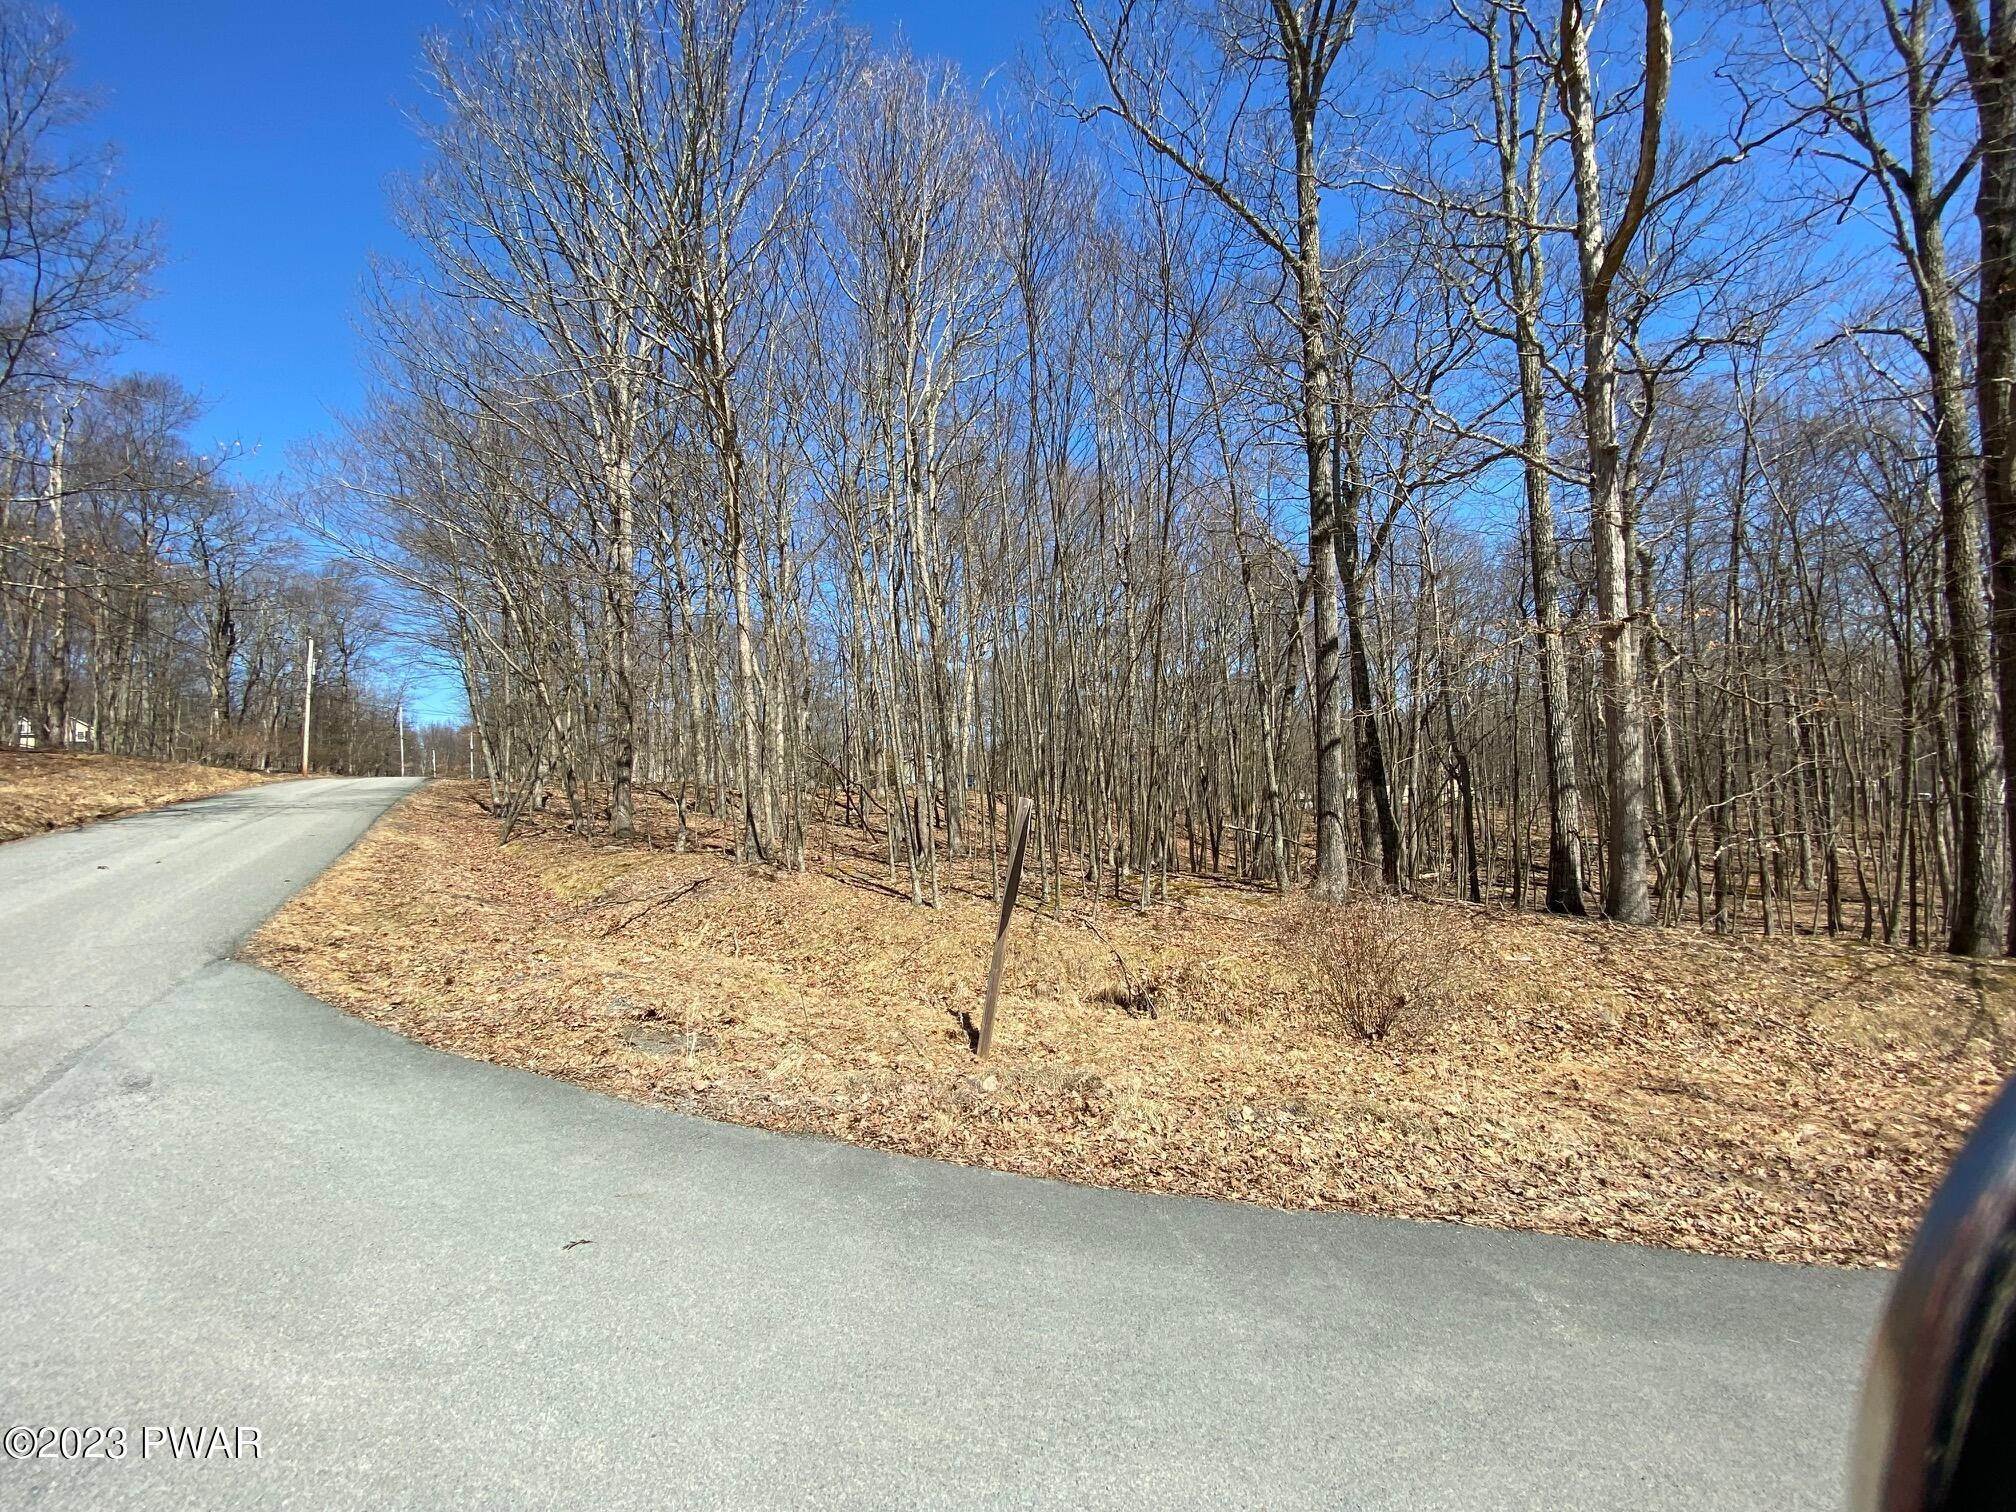 Property for Sale at Pitch Pine Lane/Drive Milford, Pennsylvania 18337 United States